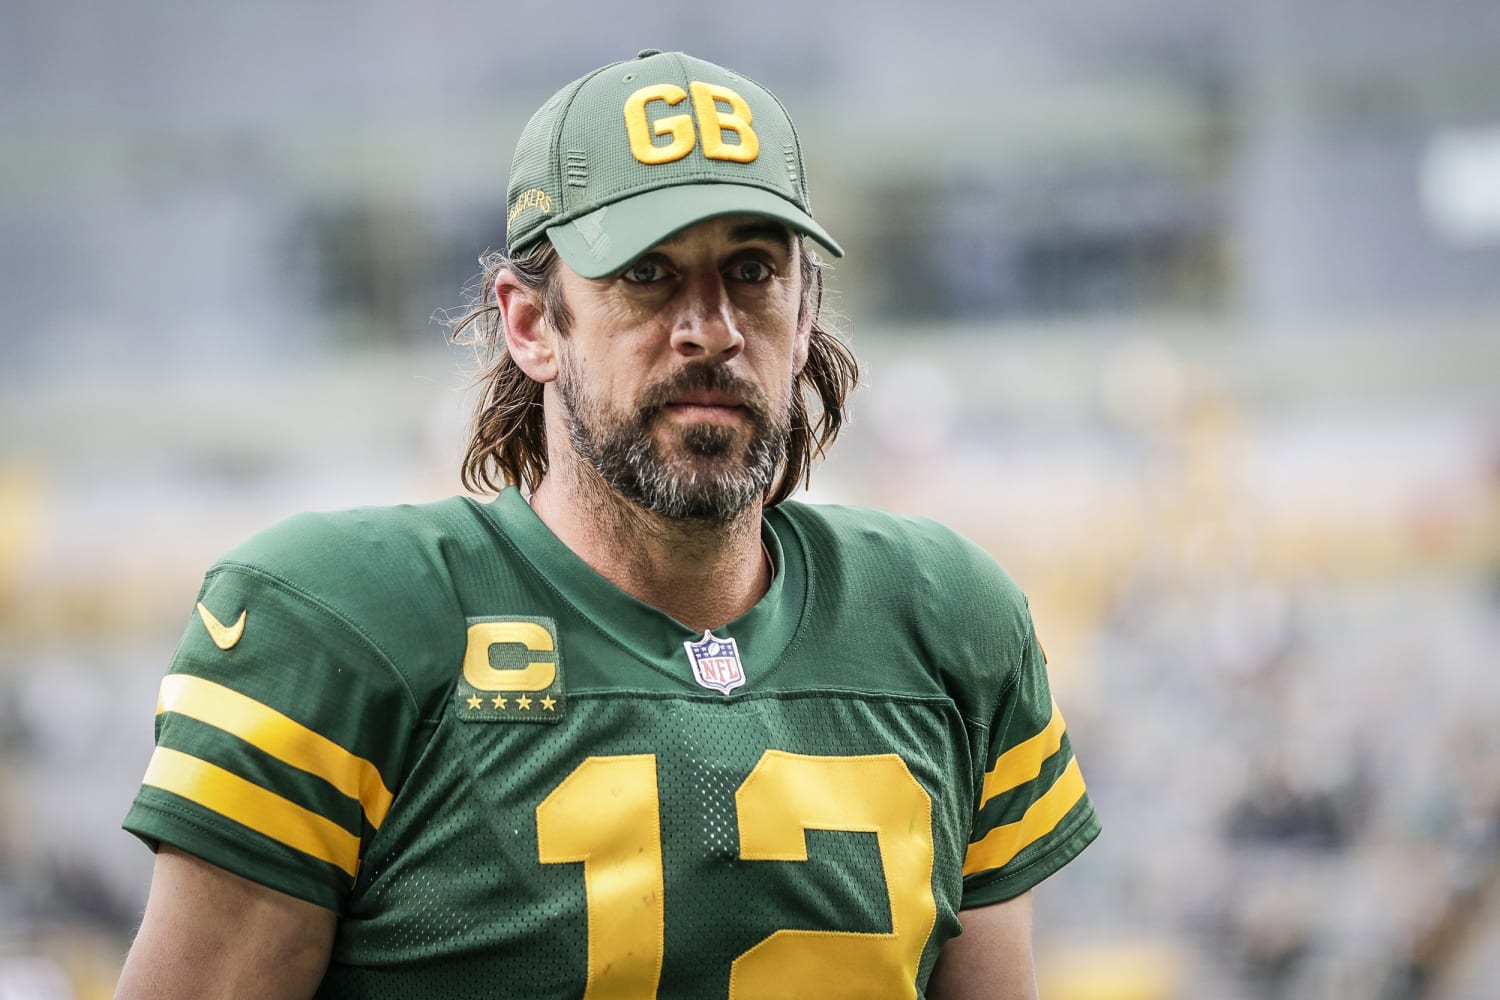 Green Bay Packers QB Aaron Rodgers crushed fans like me